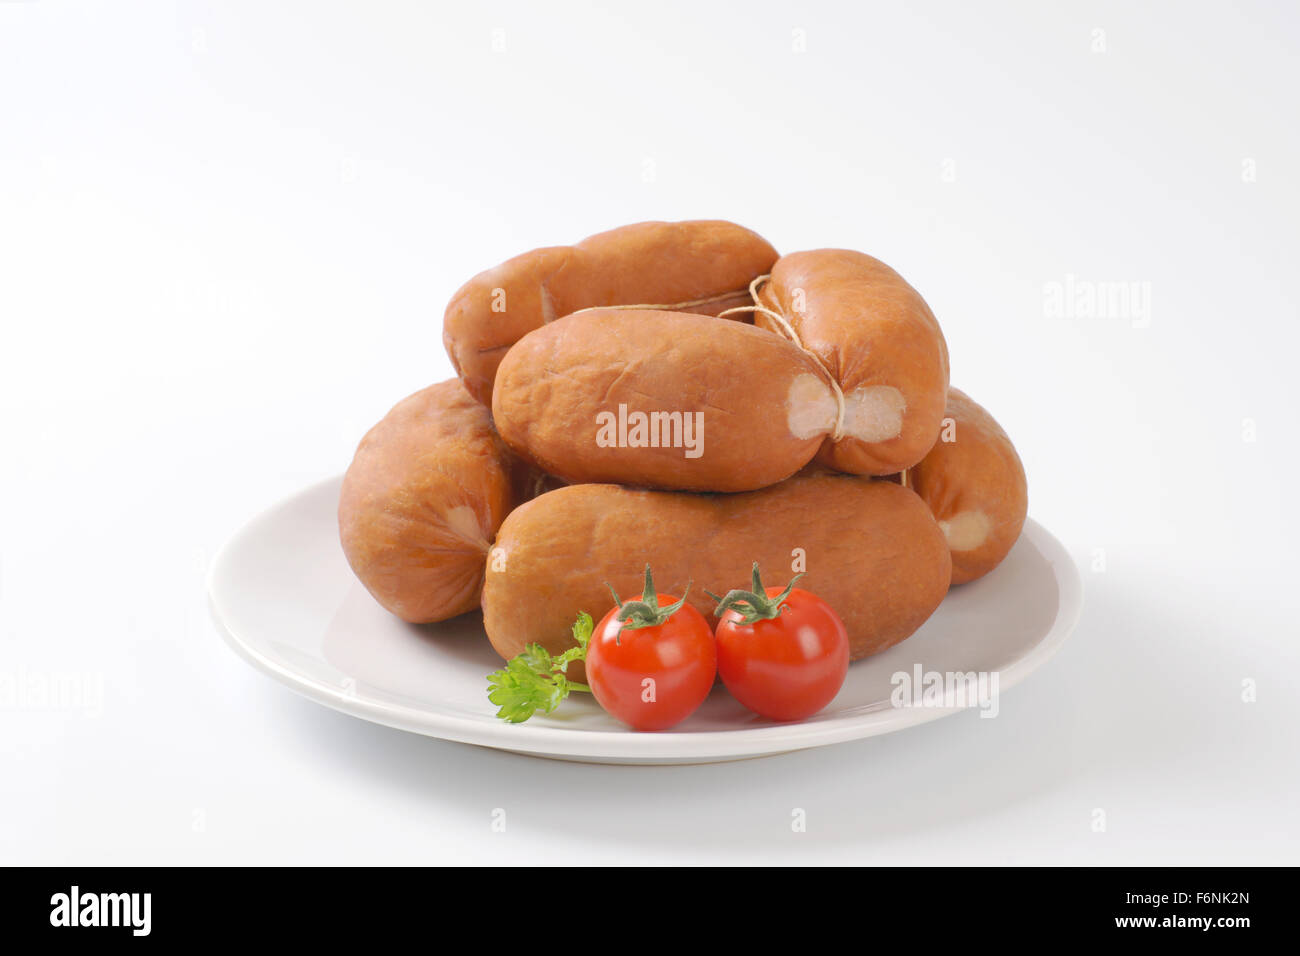 chain of raw wurst sausages on white plate Stock Photo